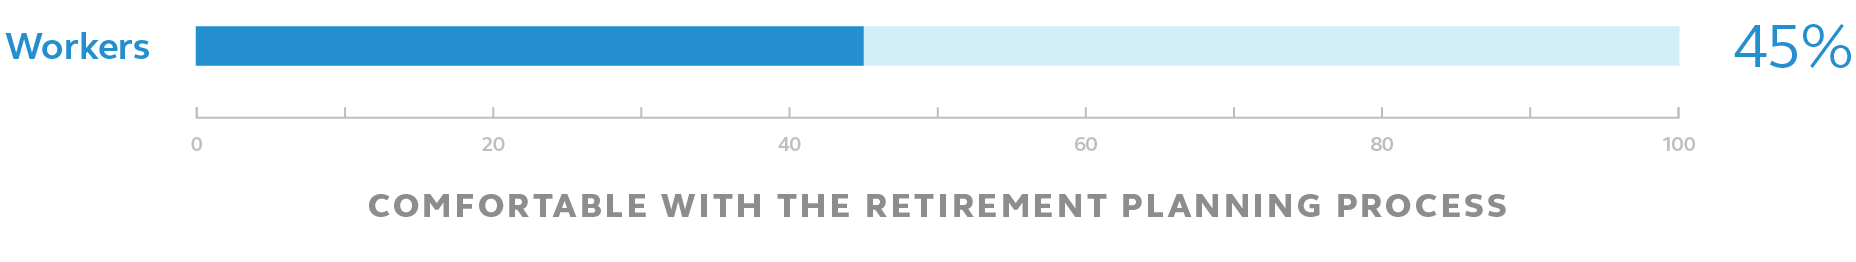 A chart showing that 45% of workers are comfortable with the retirement planning process.